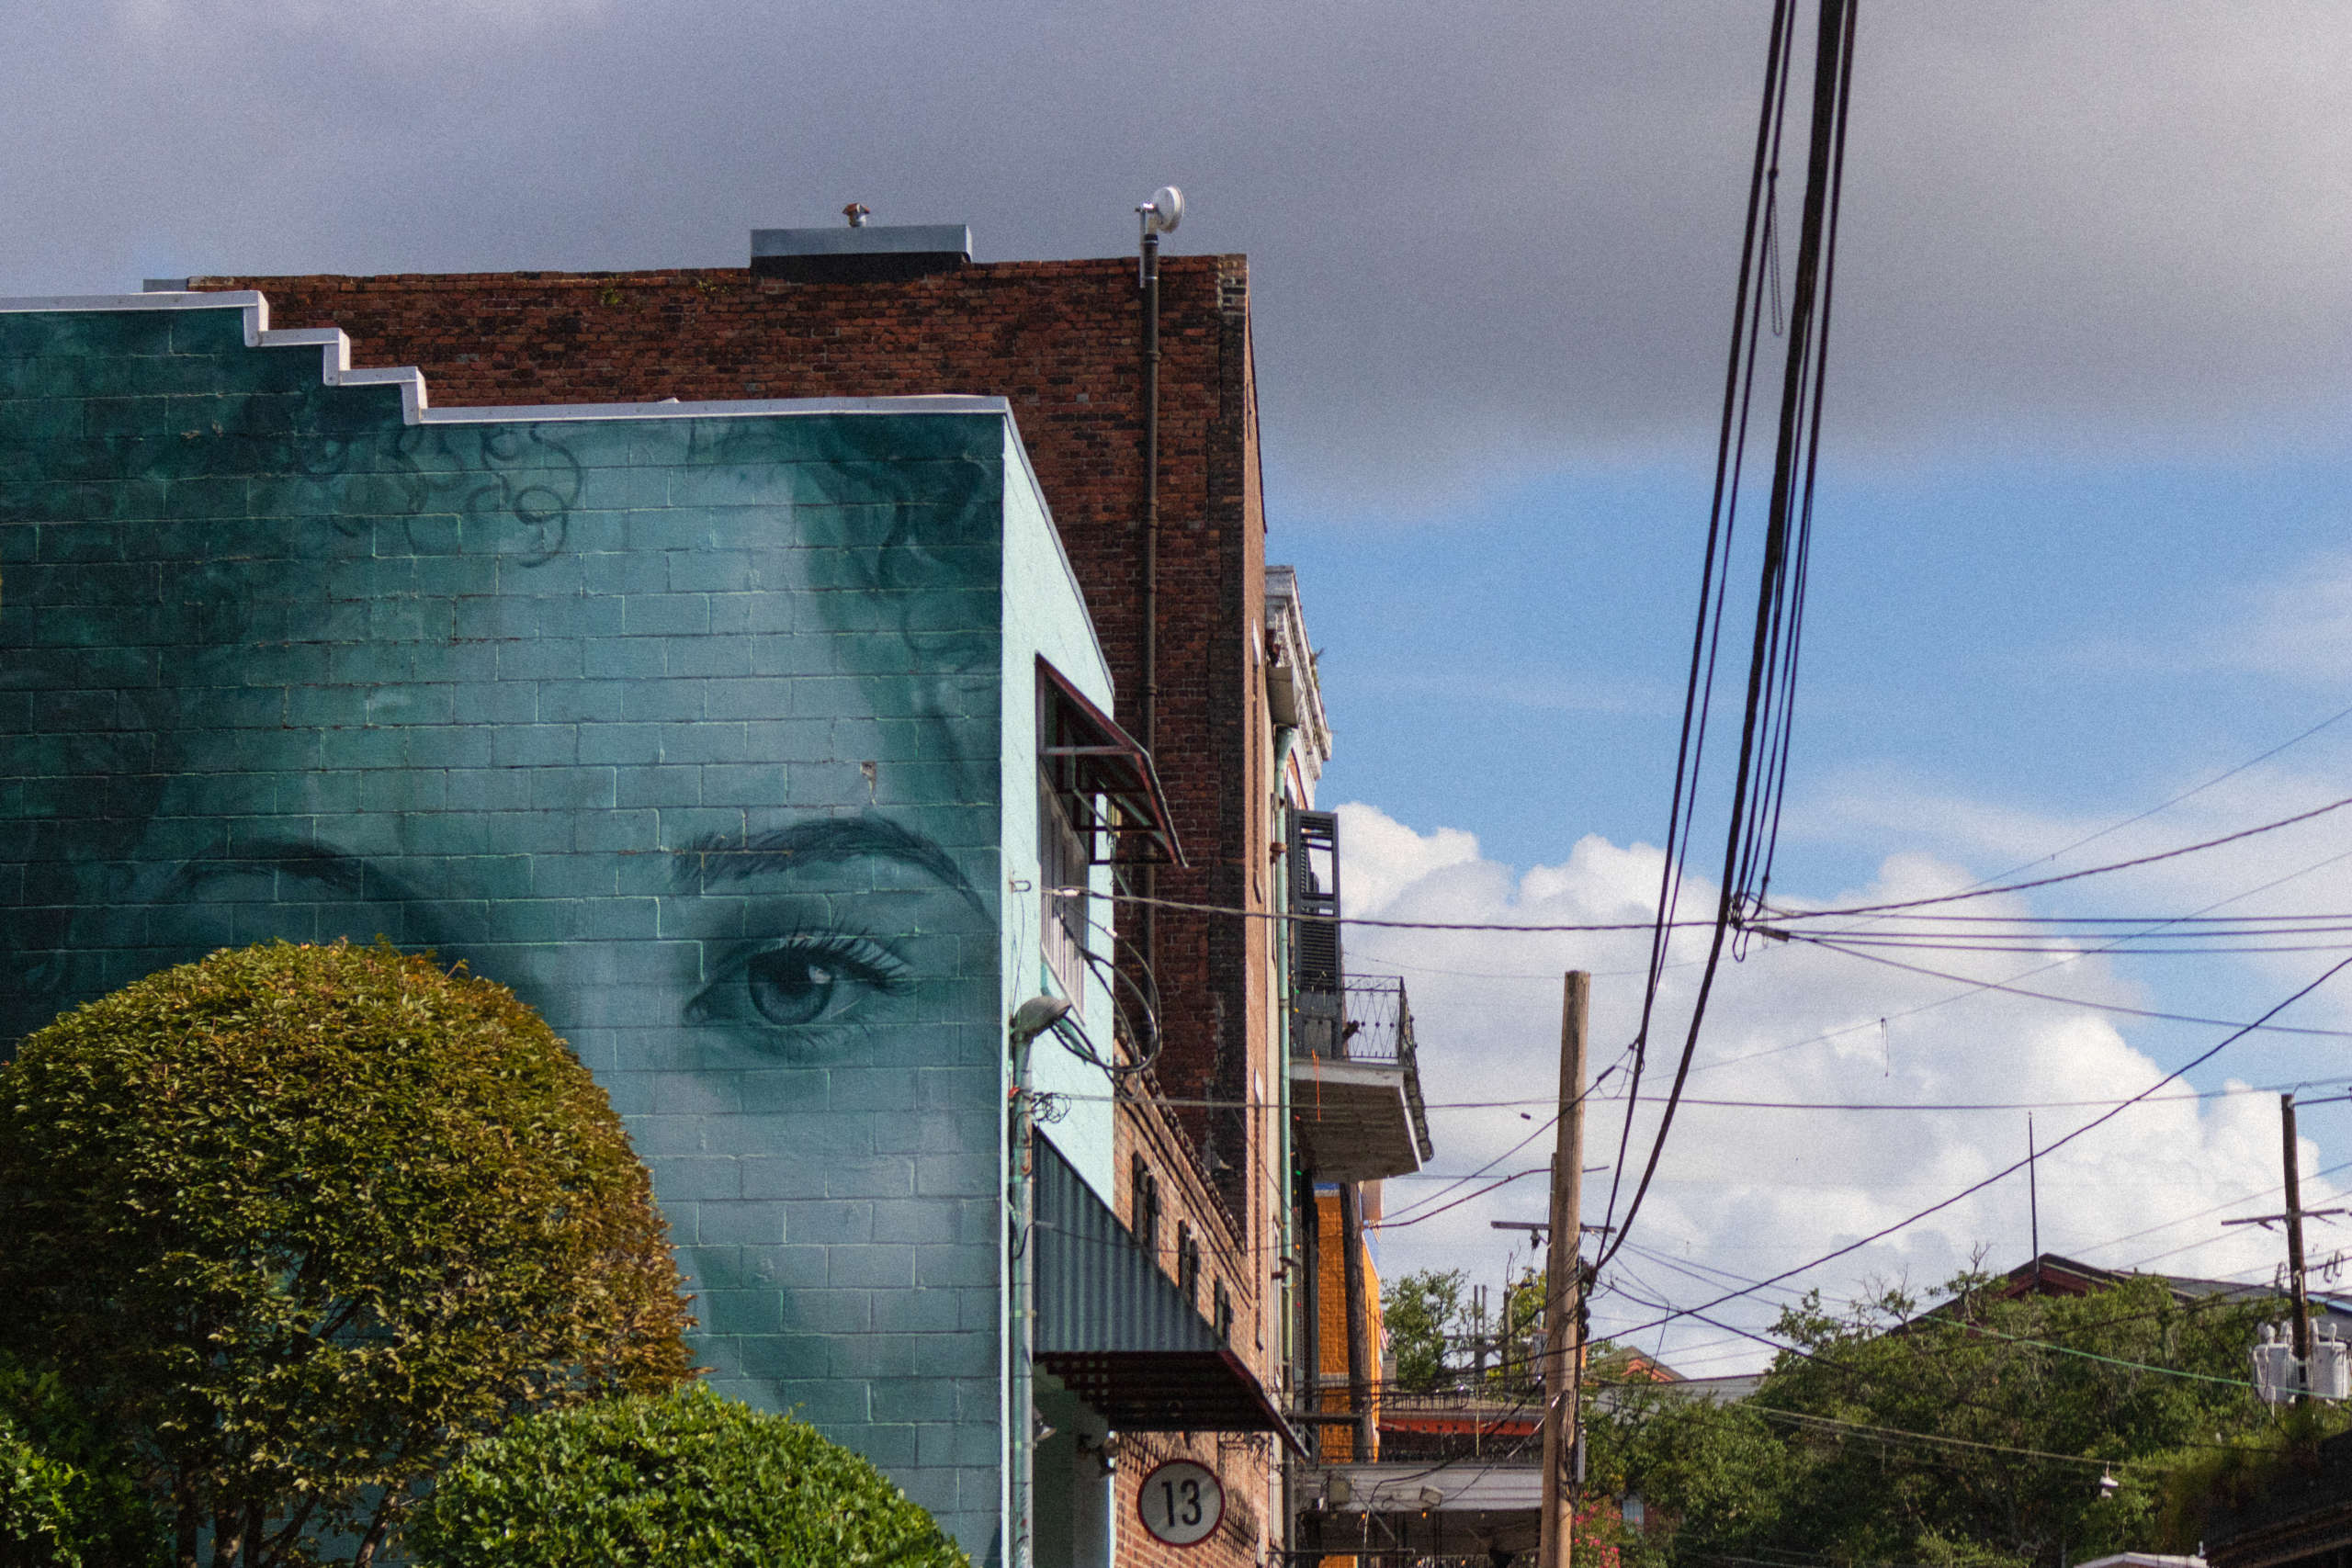 A mural of a face on a building.